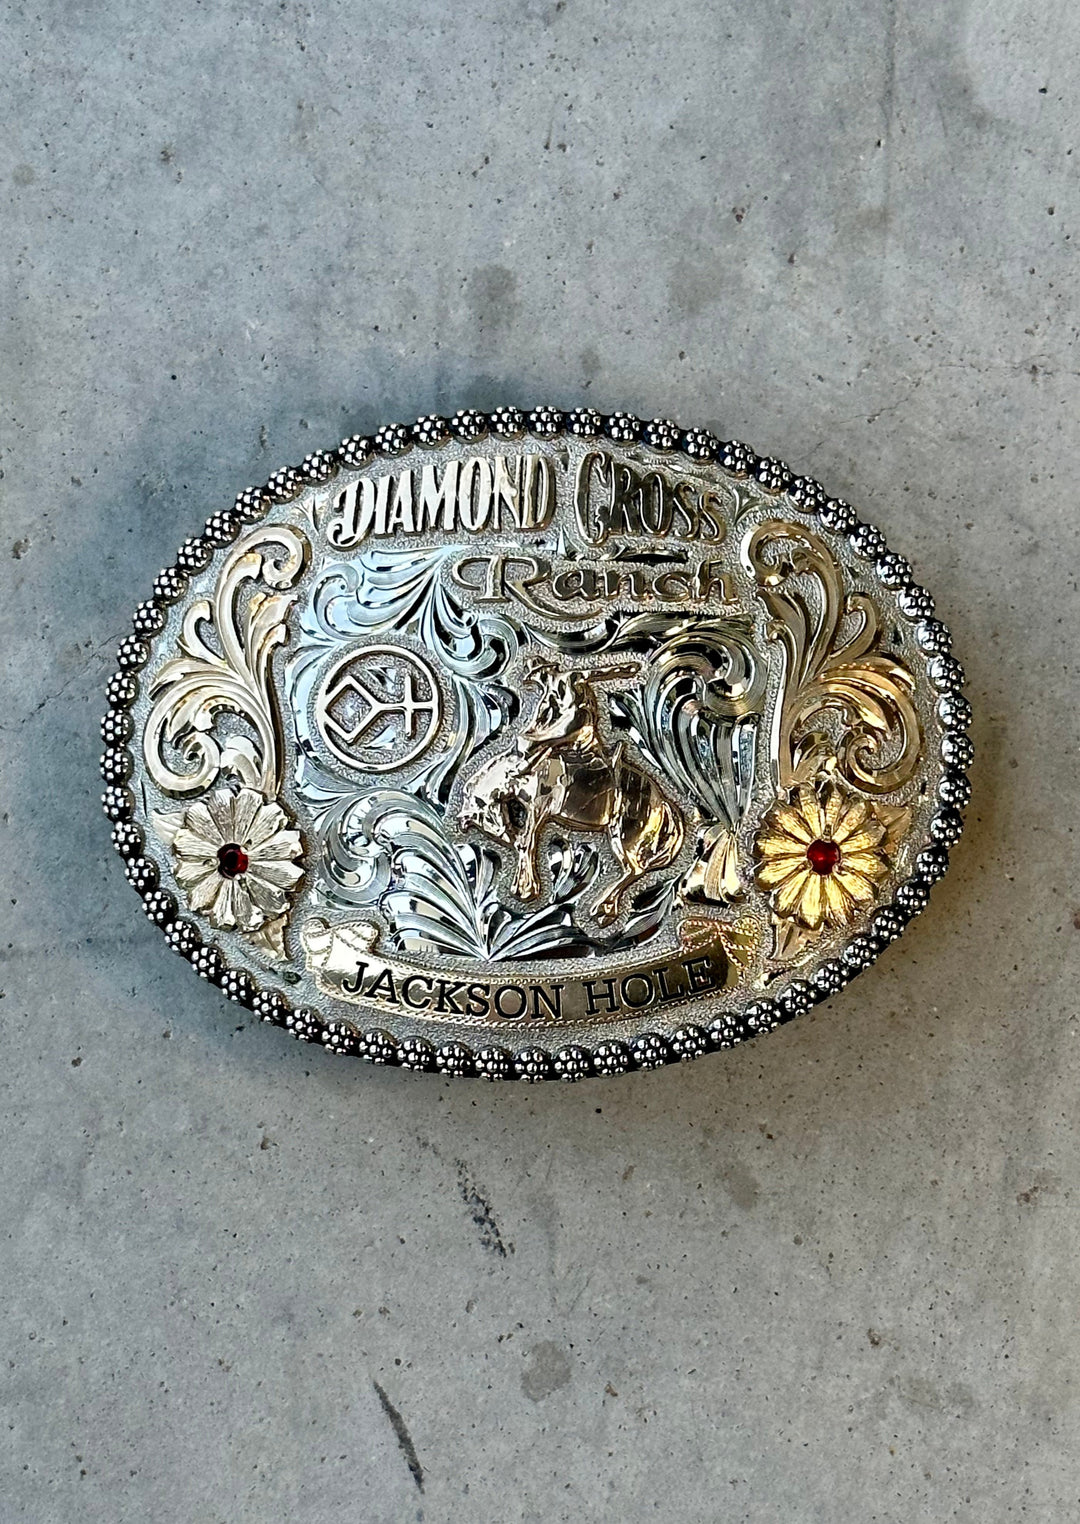 Oval Sterling Diamond & Gold Buckle - 1 1/2